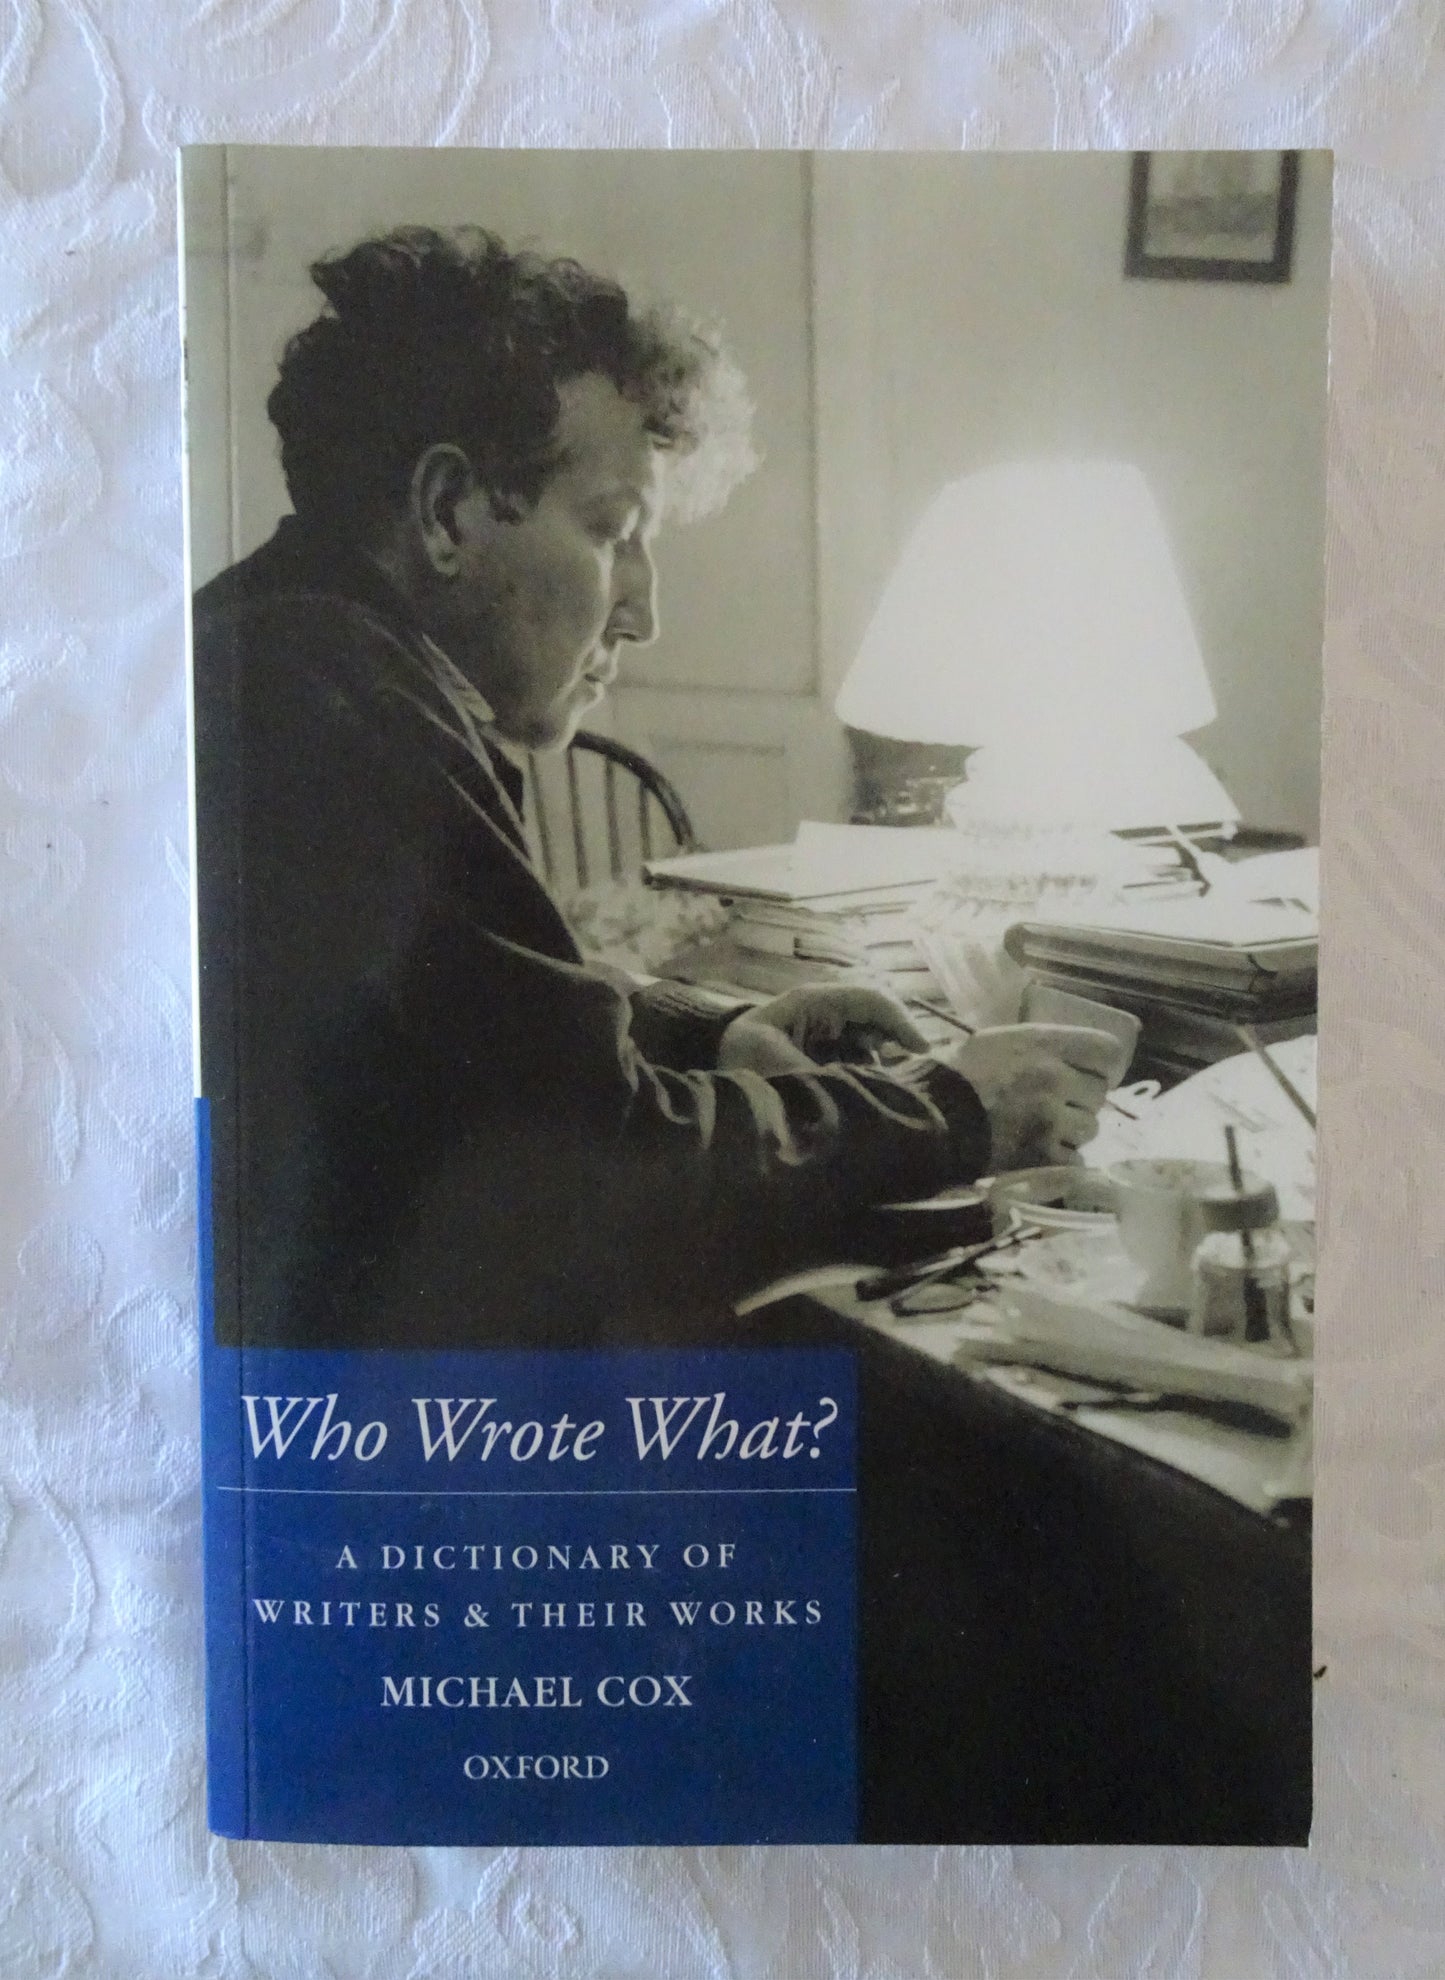 Who Wrote What?  A Dictionary of Writers & Their Works  by Michael Cox